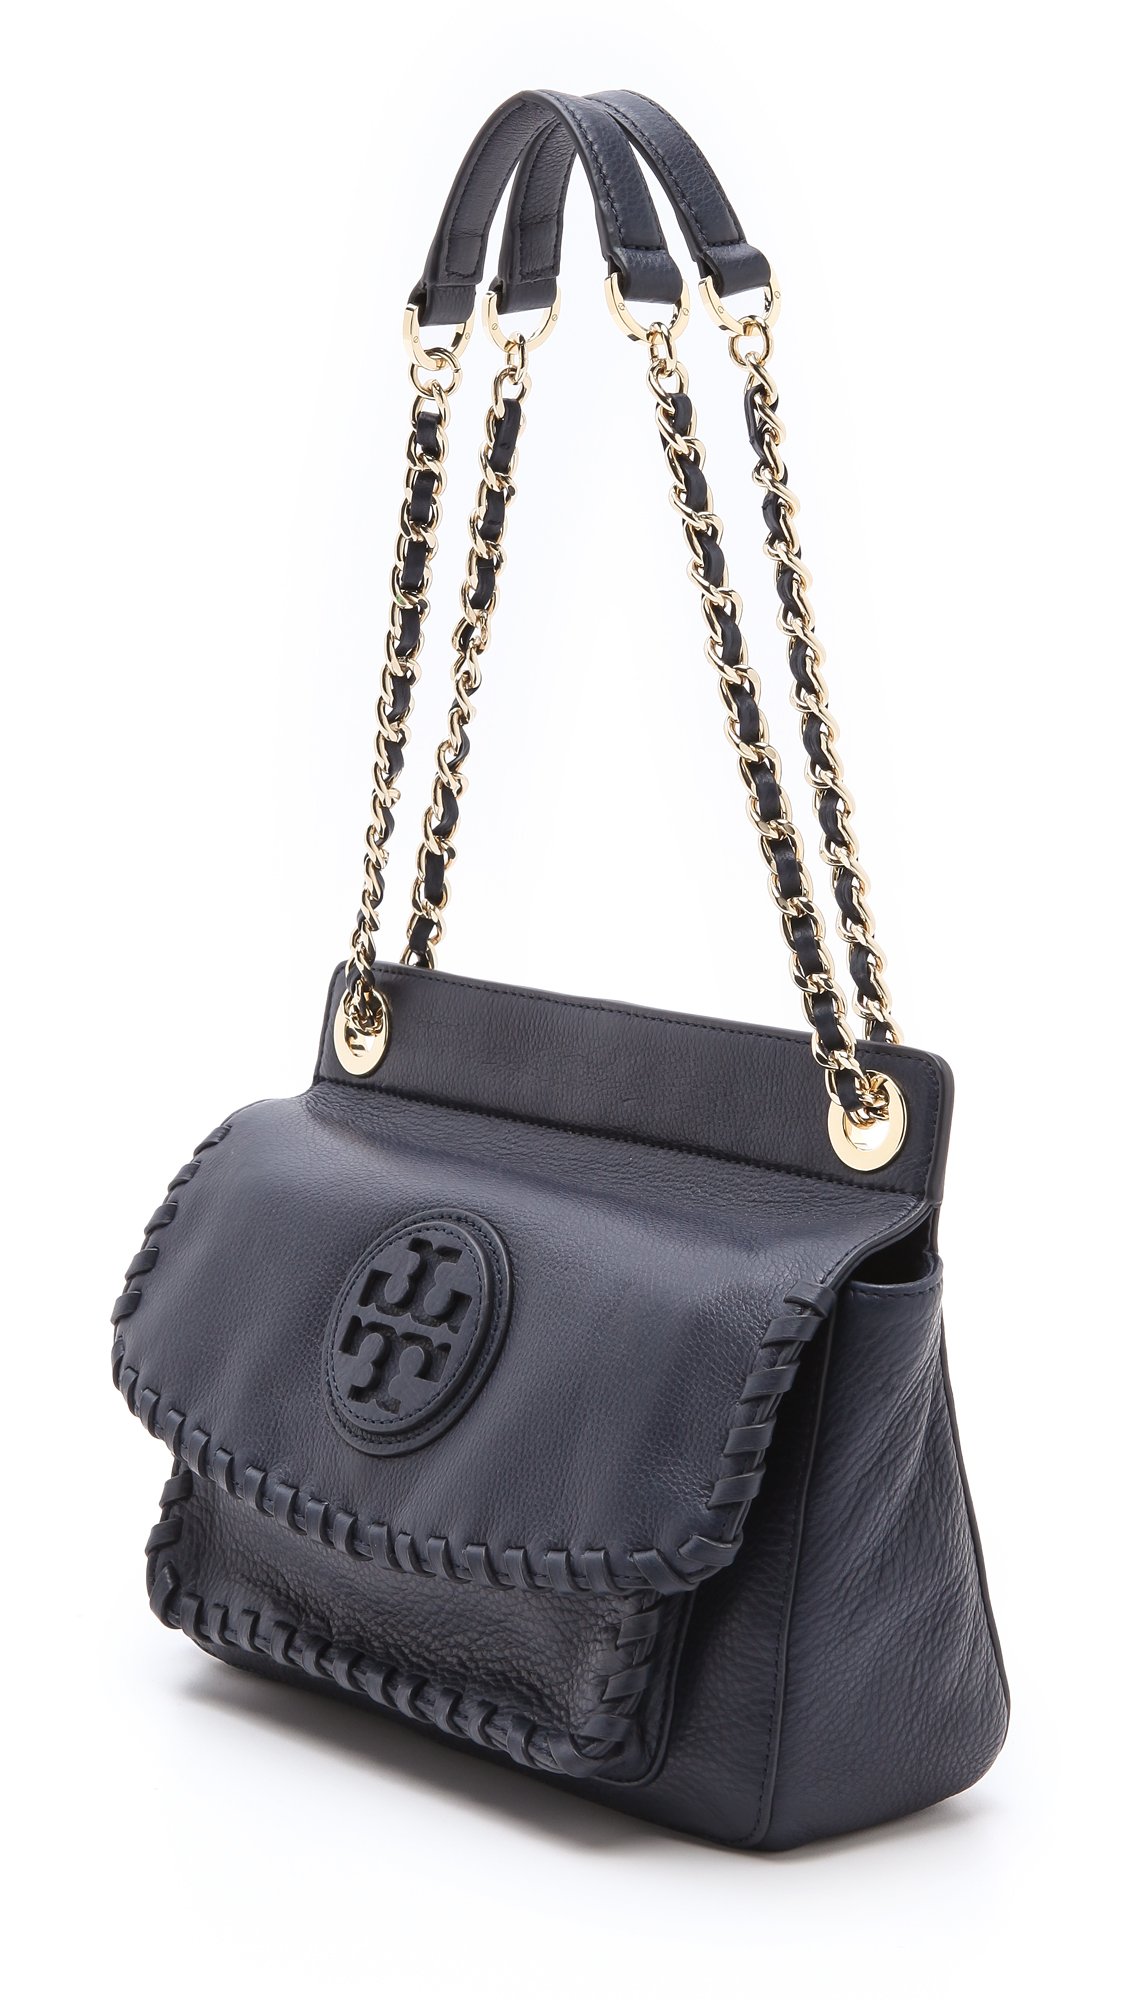 Lyst - Tory Burch Marion Small Shoulder Bag in Blue